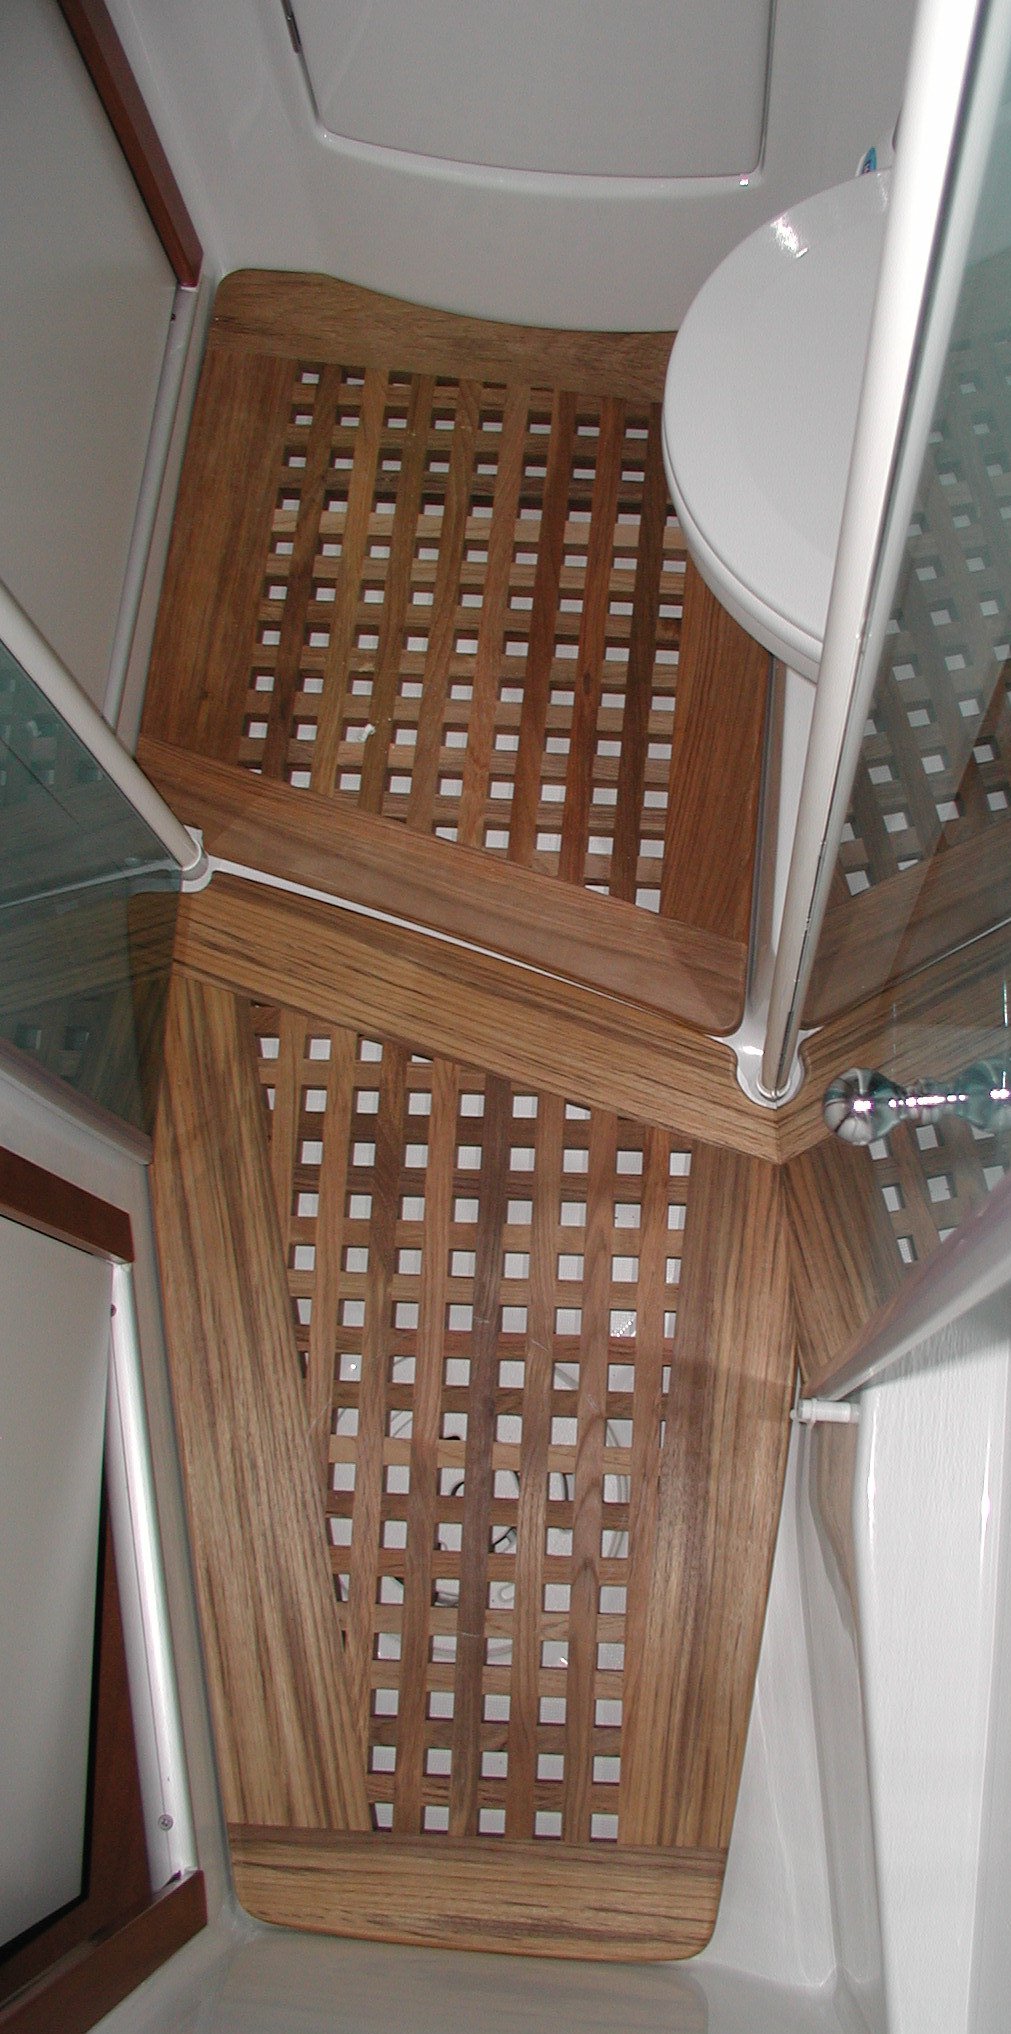 View on a grating for a head, Beneteau sailing yacht